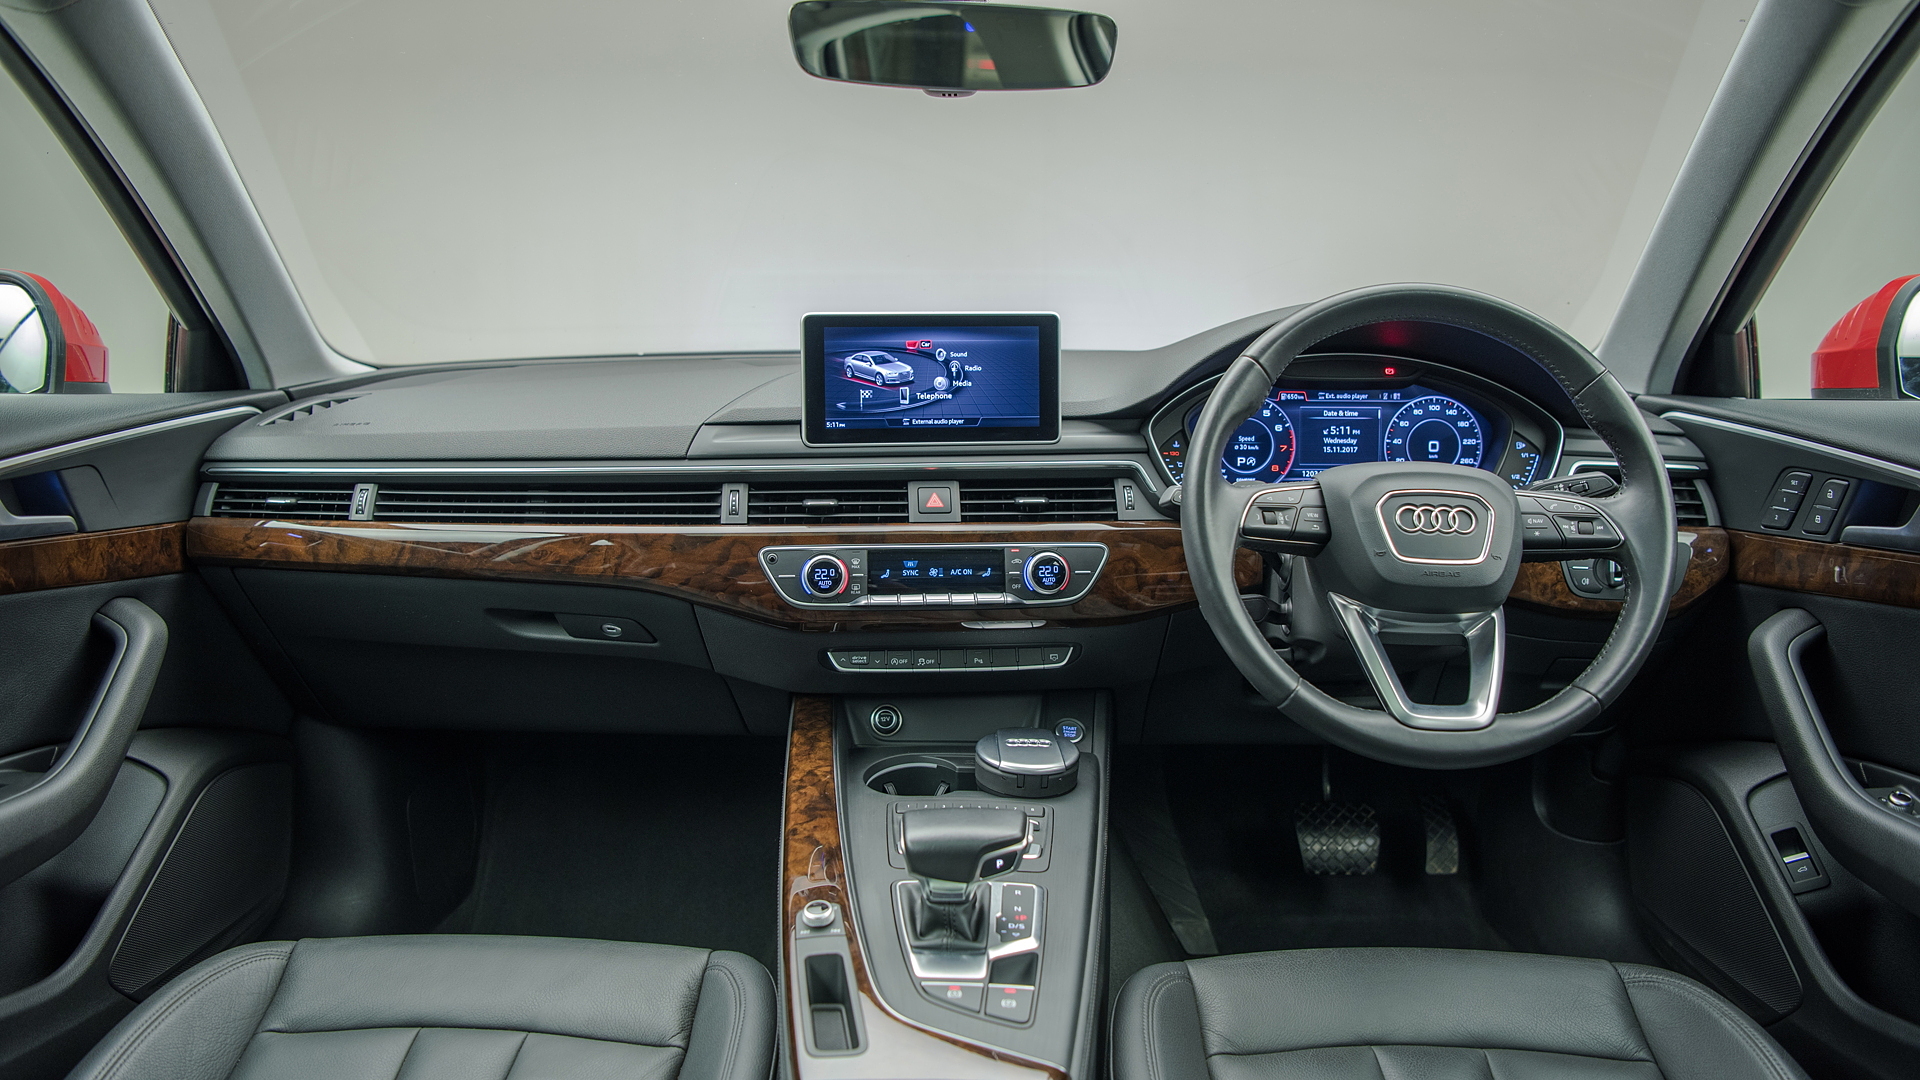 Audi A4 Images Interior Exterior Photo Gallery Carwale